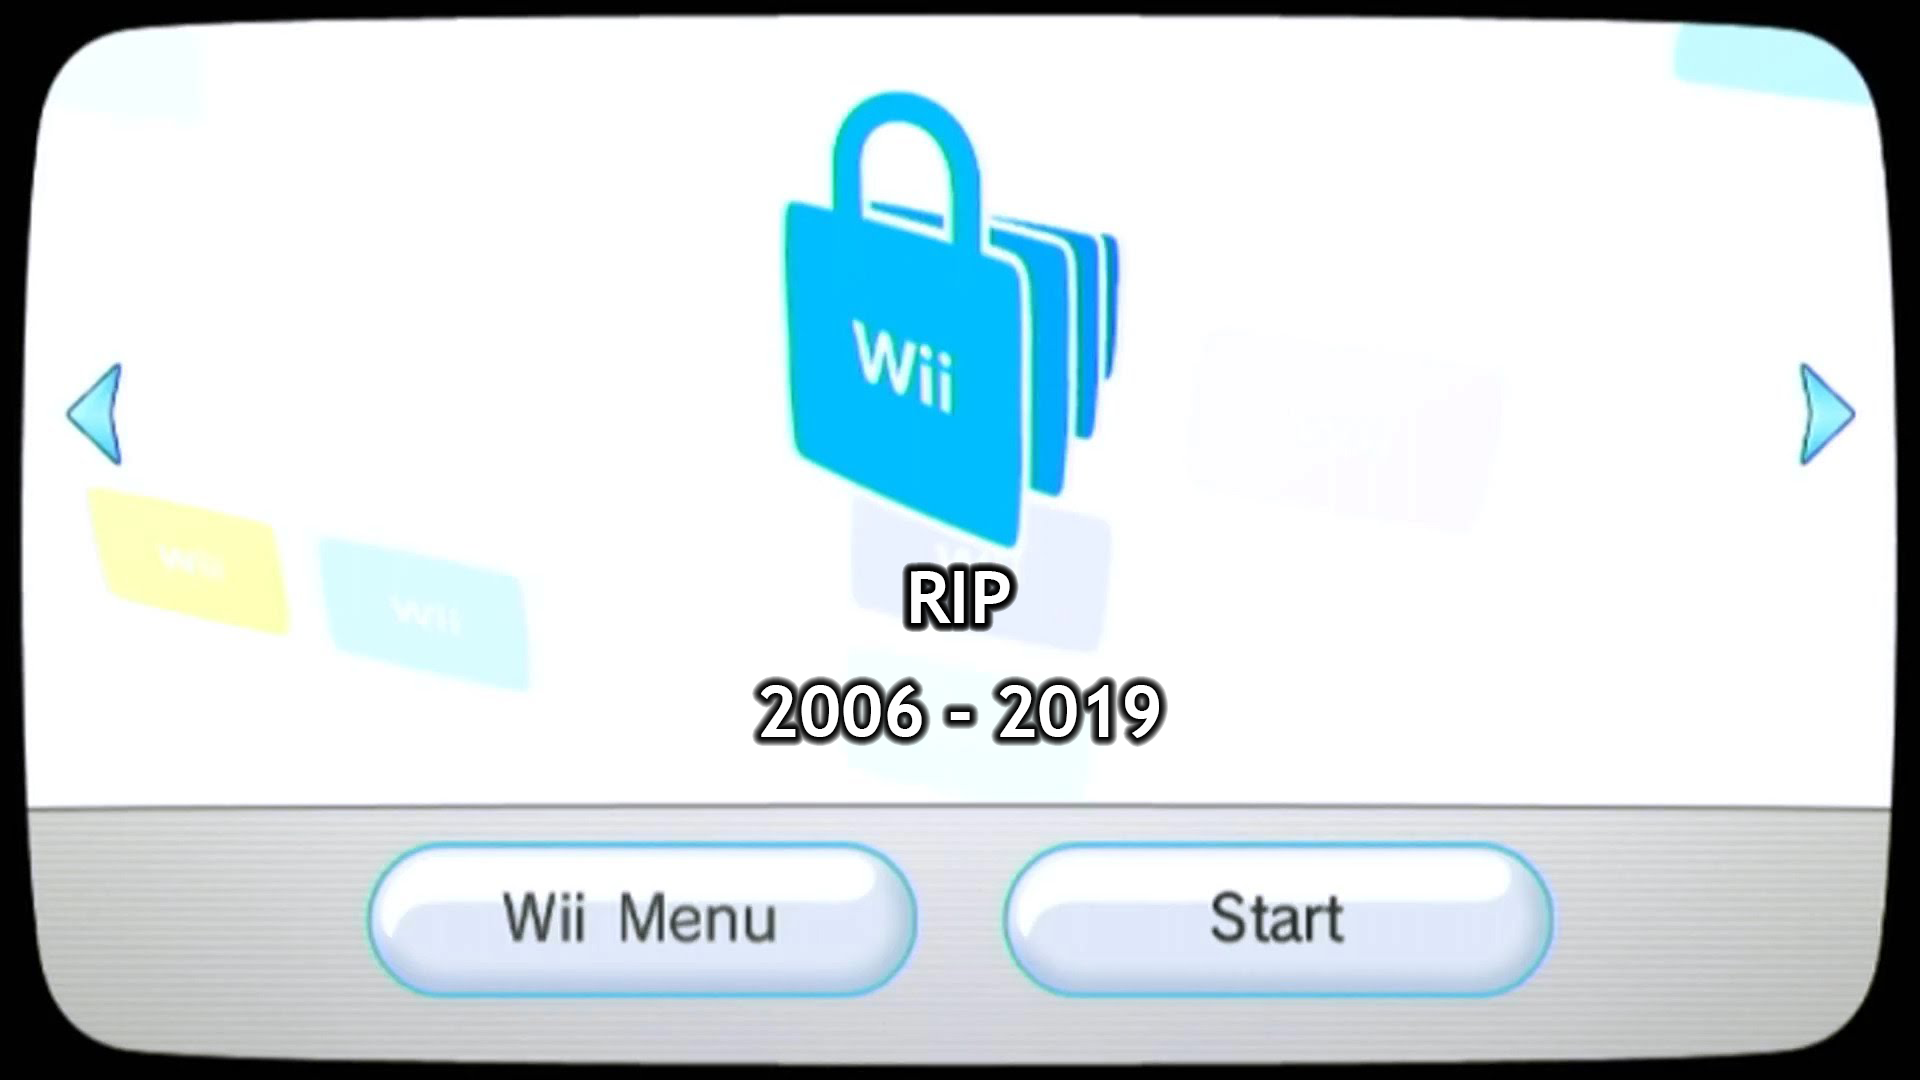 wii shop channel not working